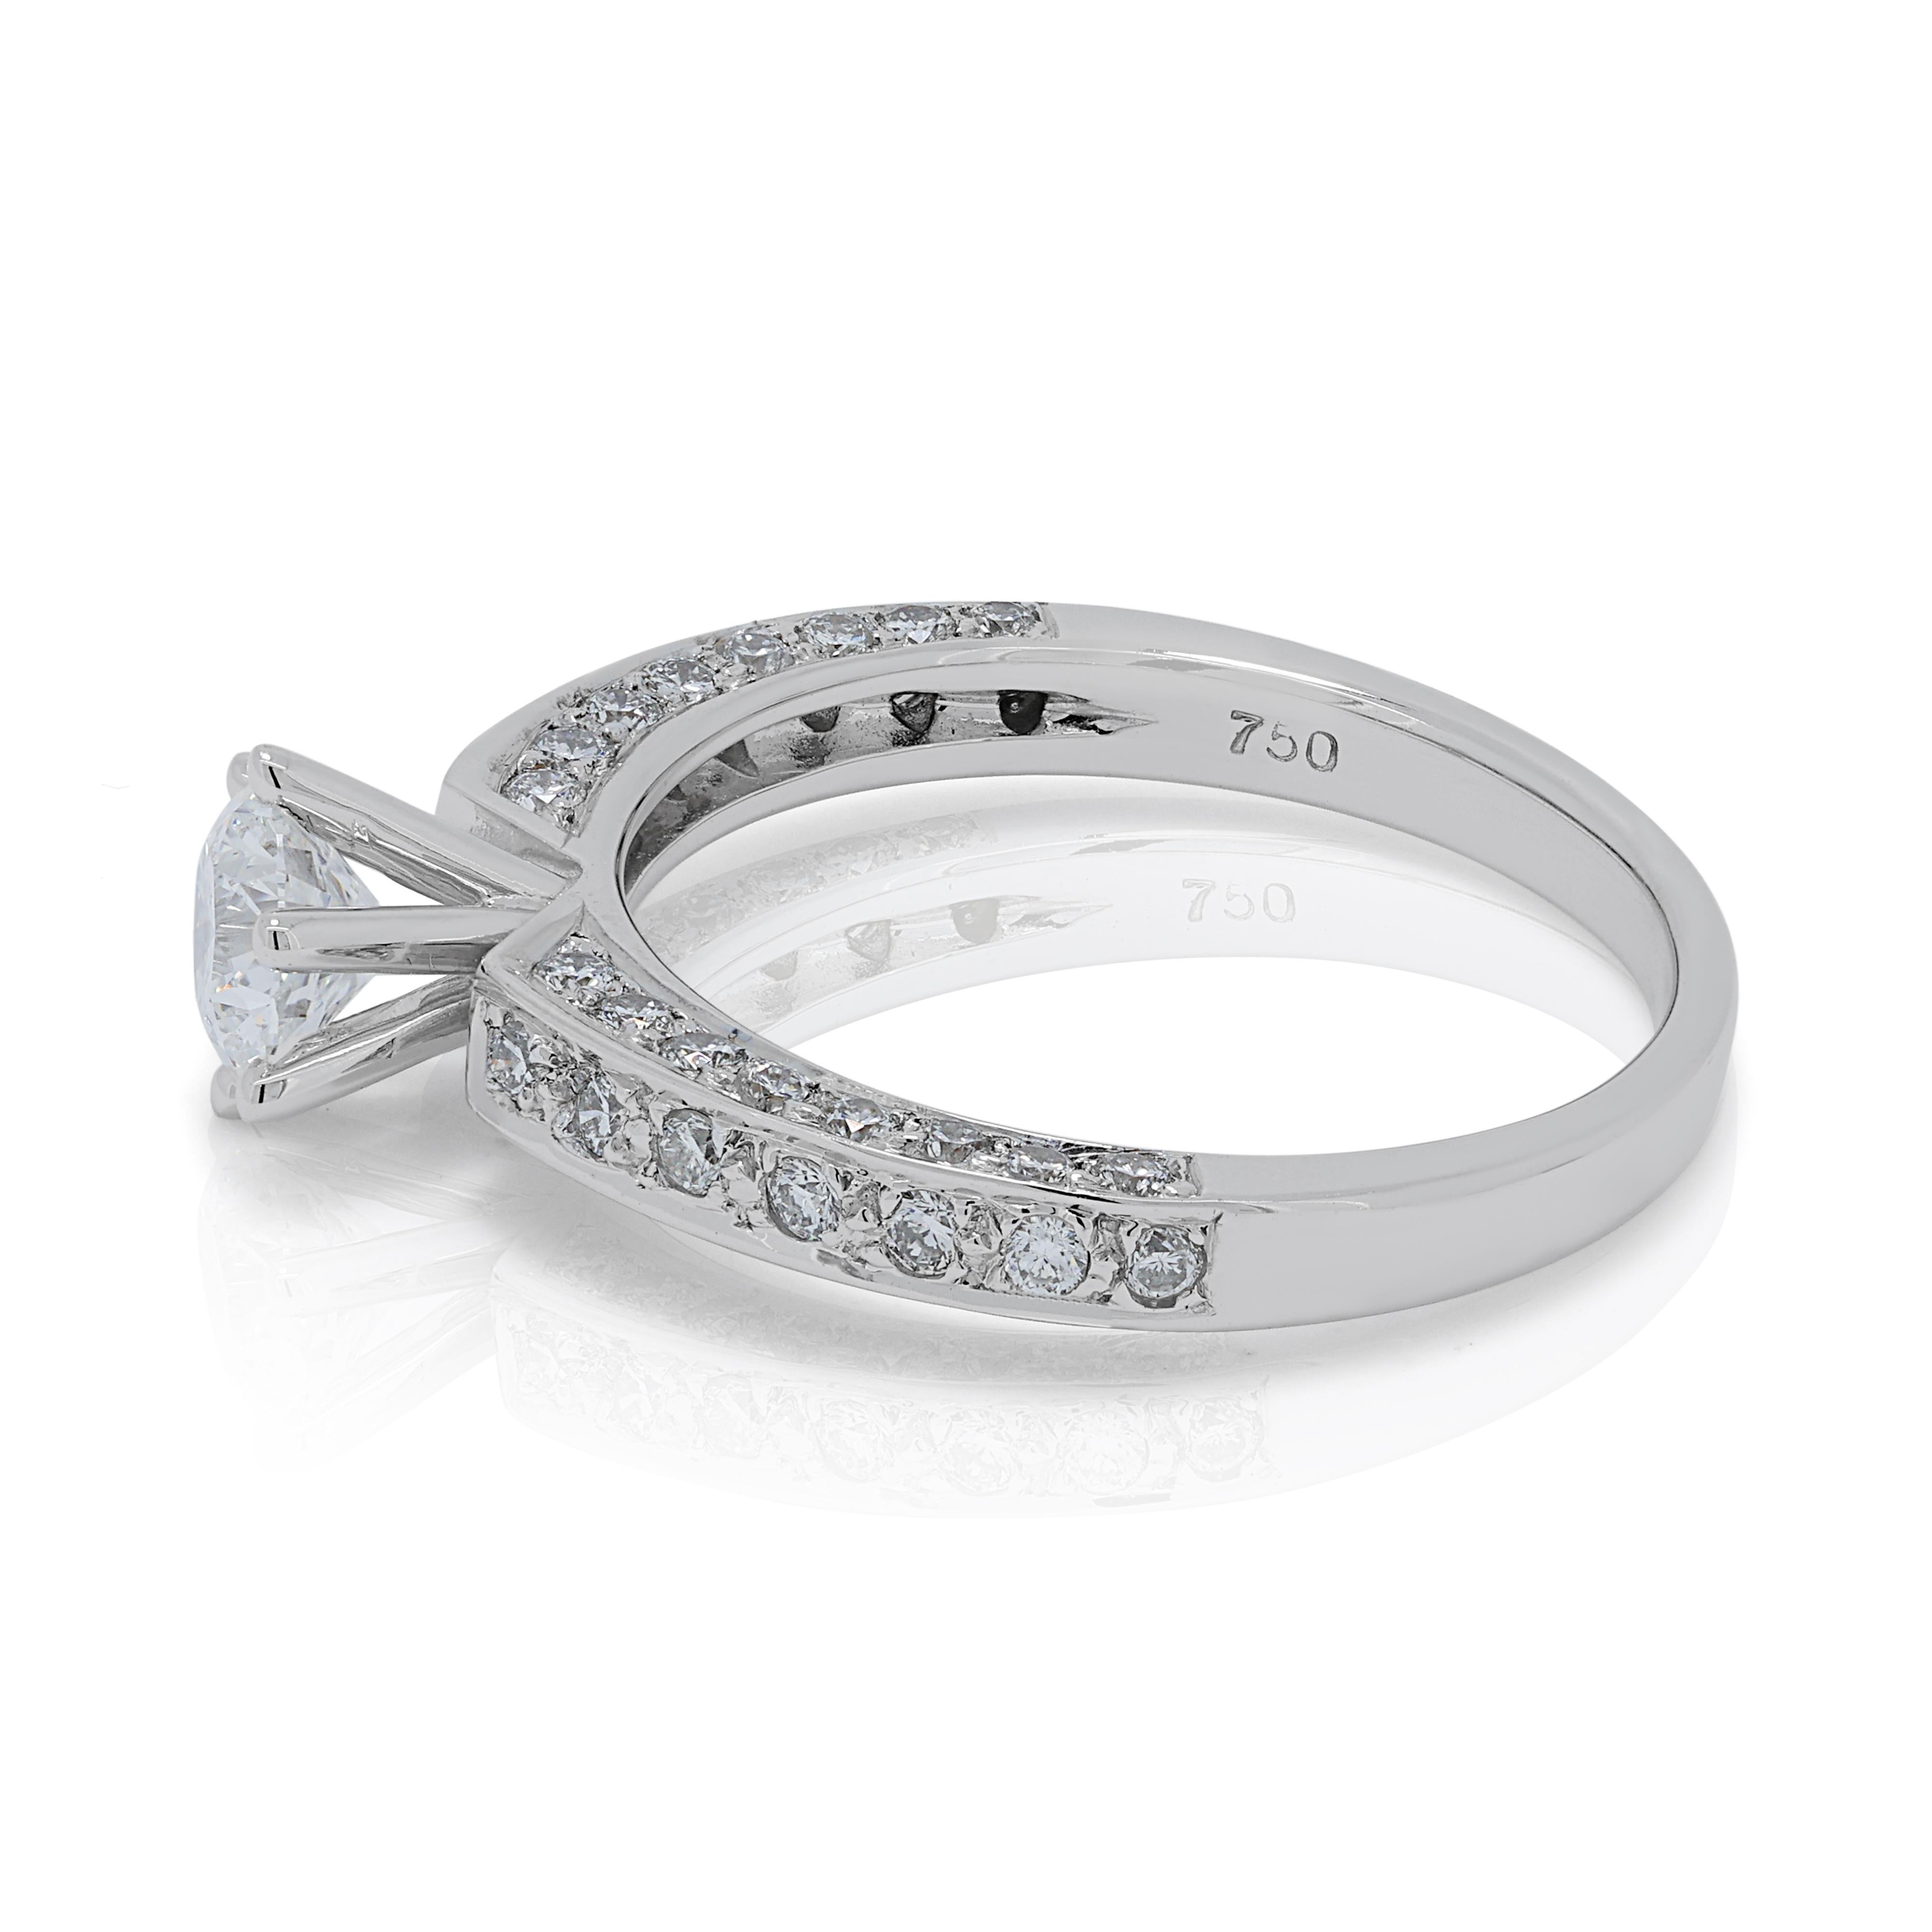 Stunning 0.51ct Diamond Pave Ring with Side Diamonds in 18K White Gold For Sale 1